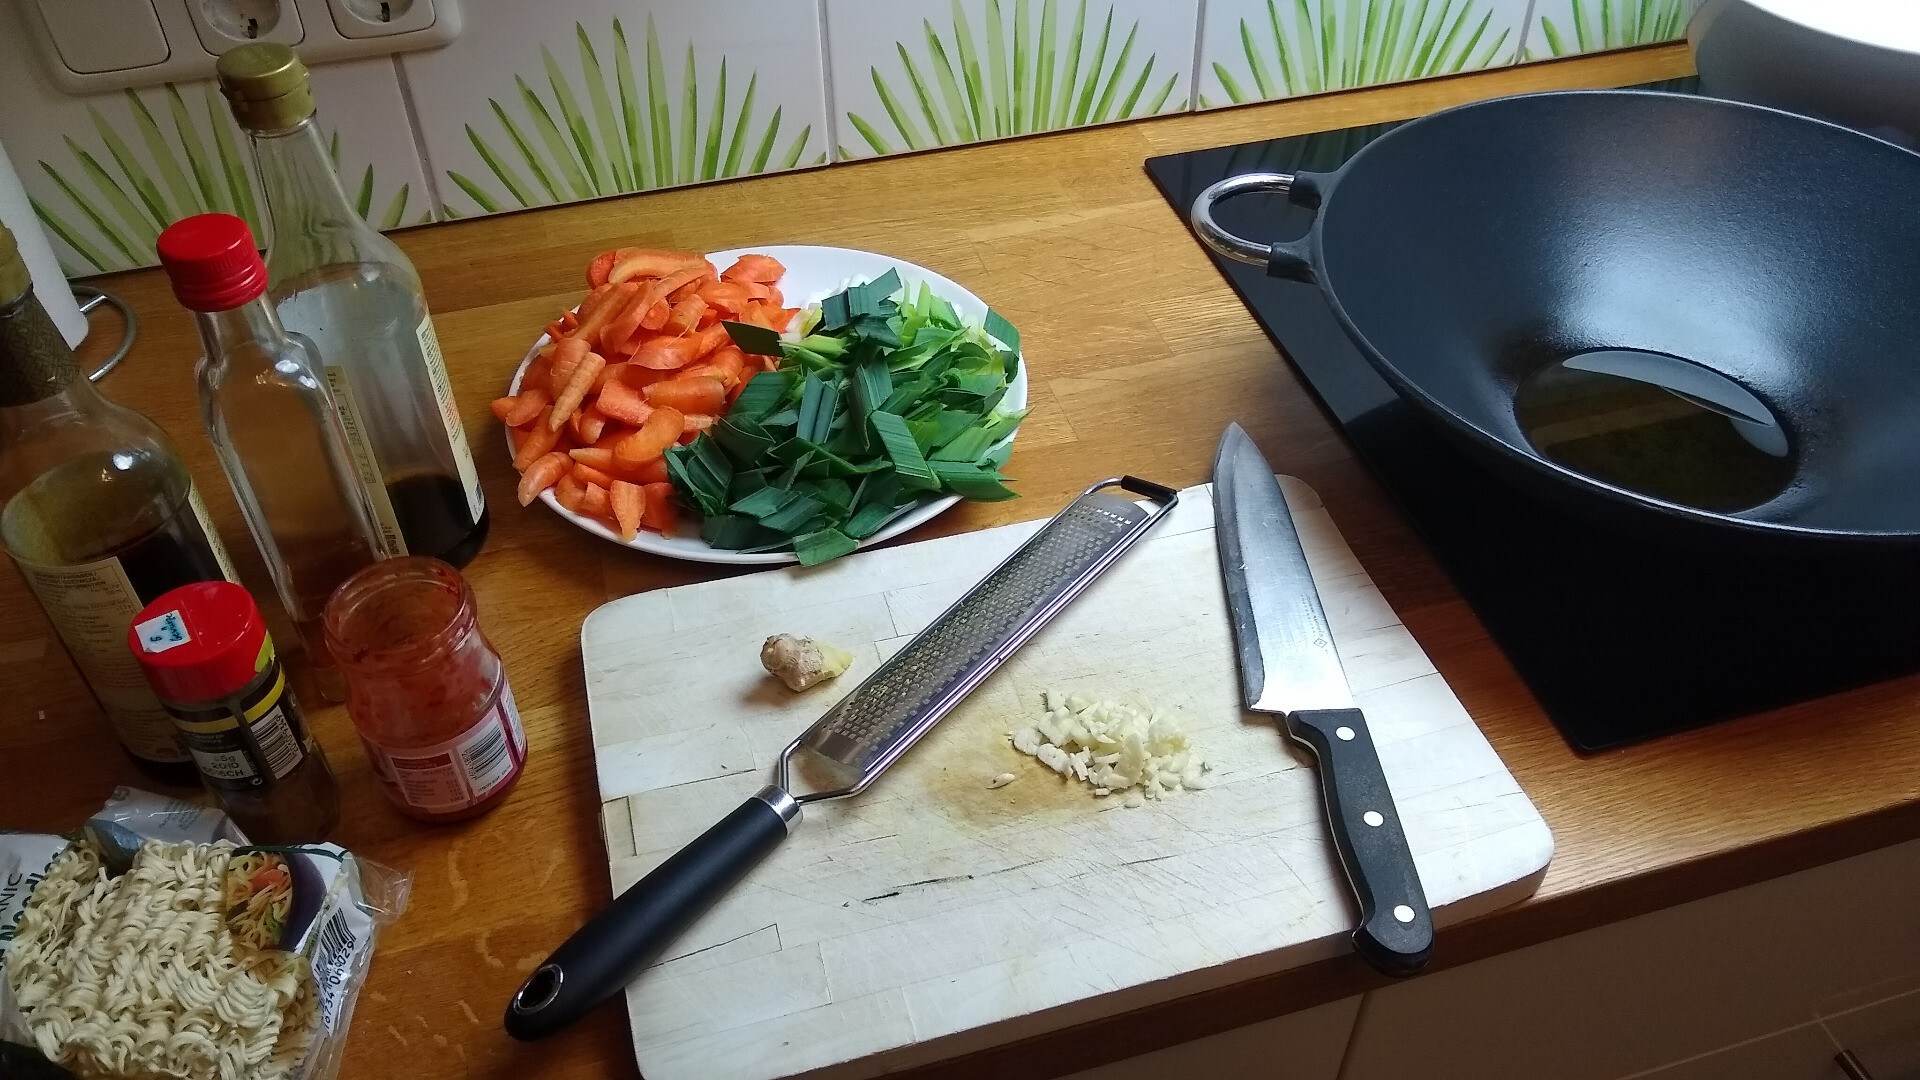 preparations for noodles with vegetable stir-fry